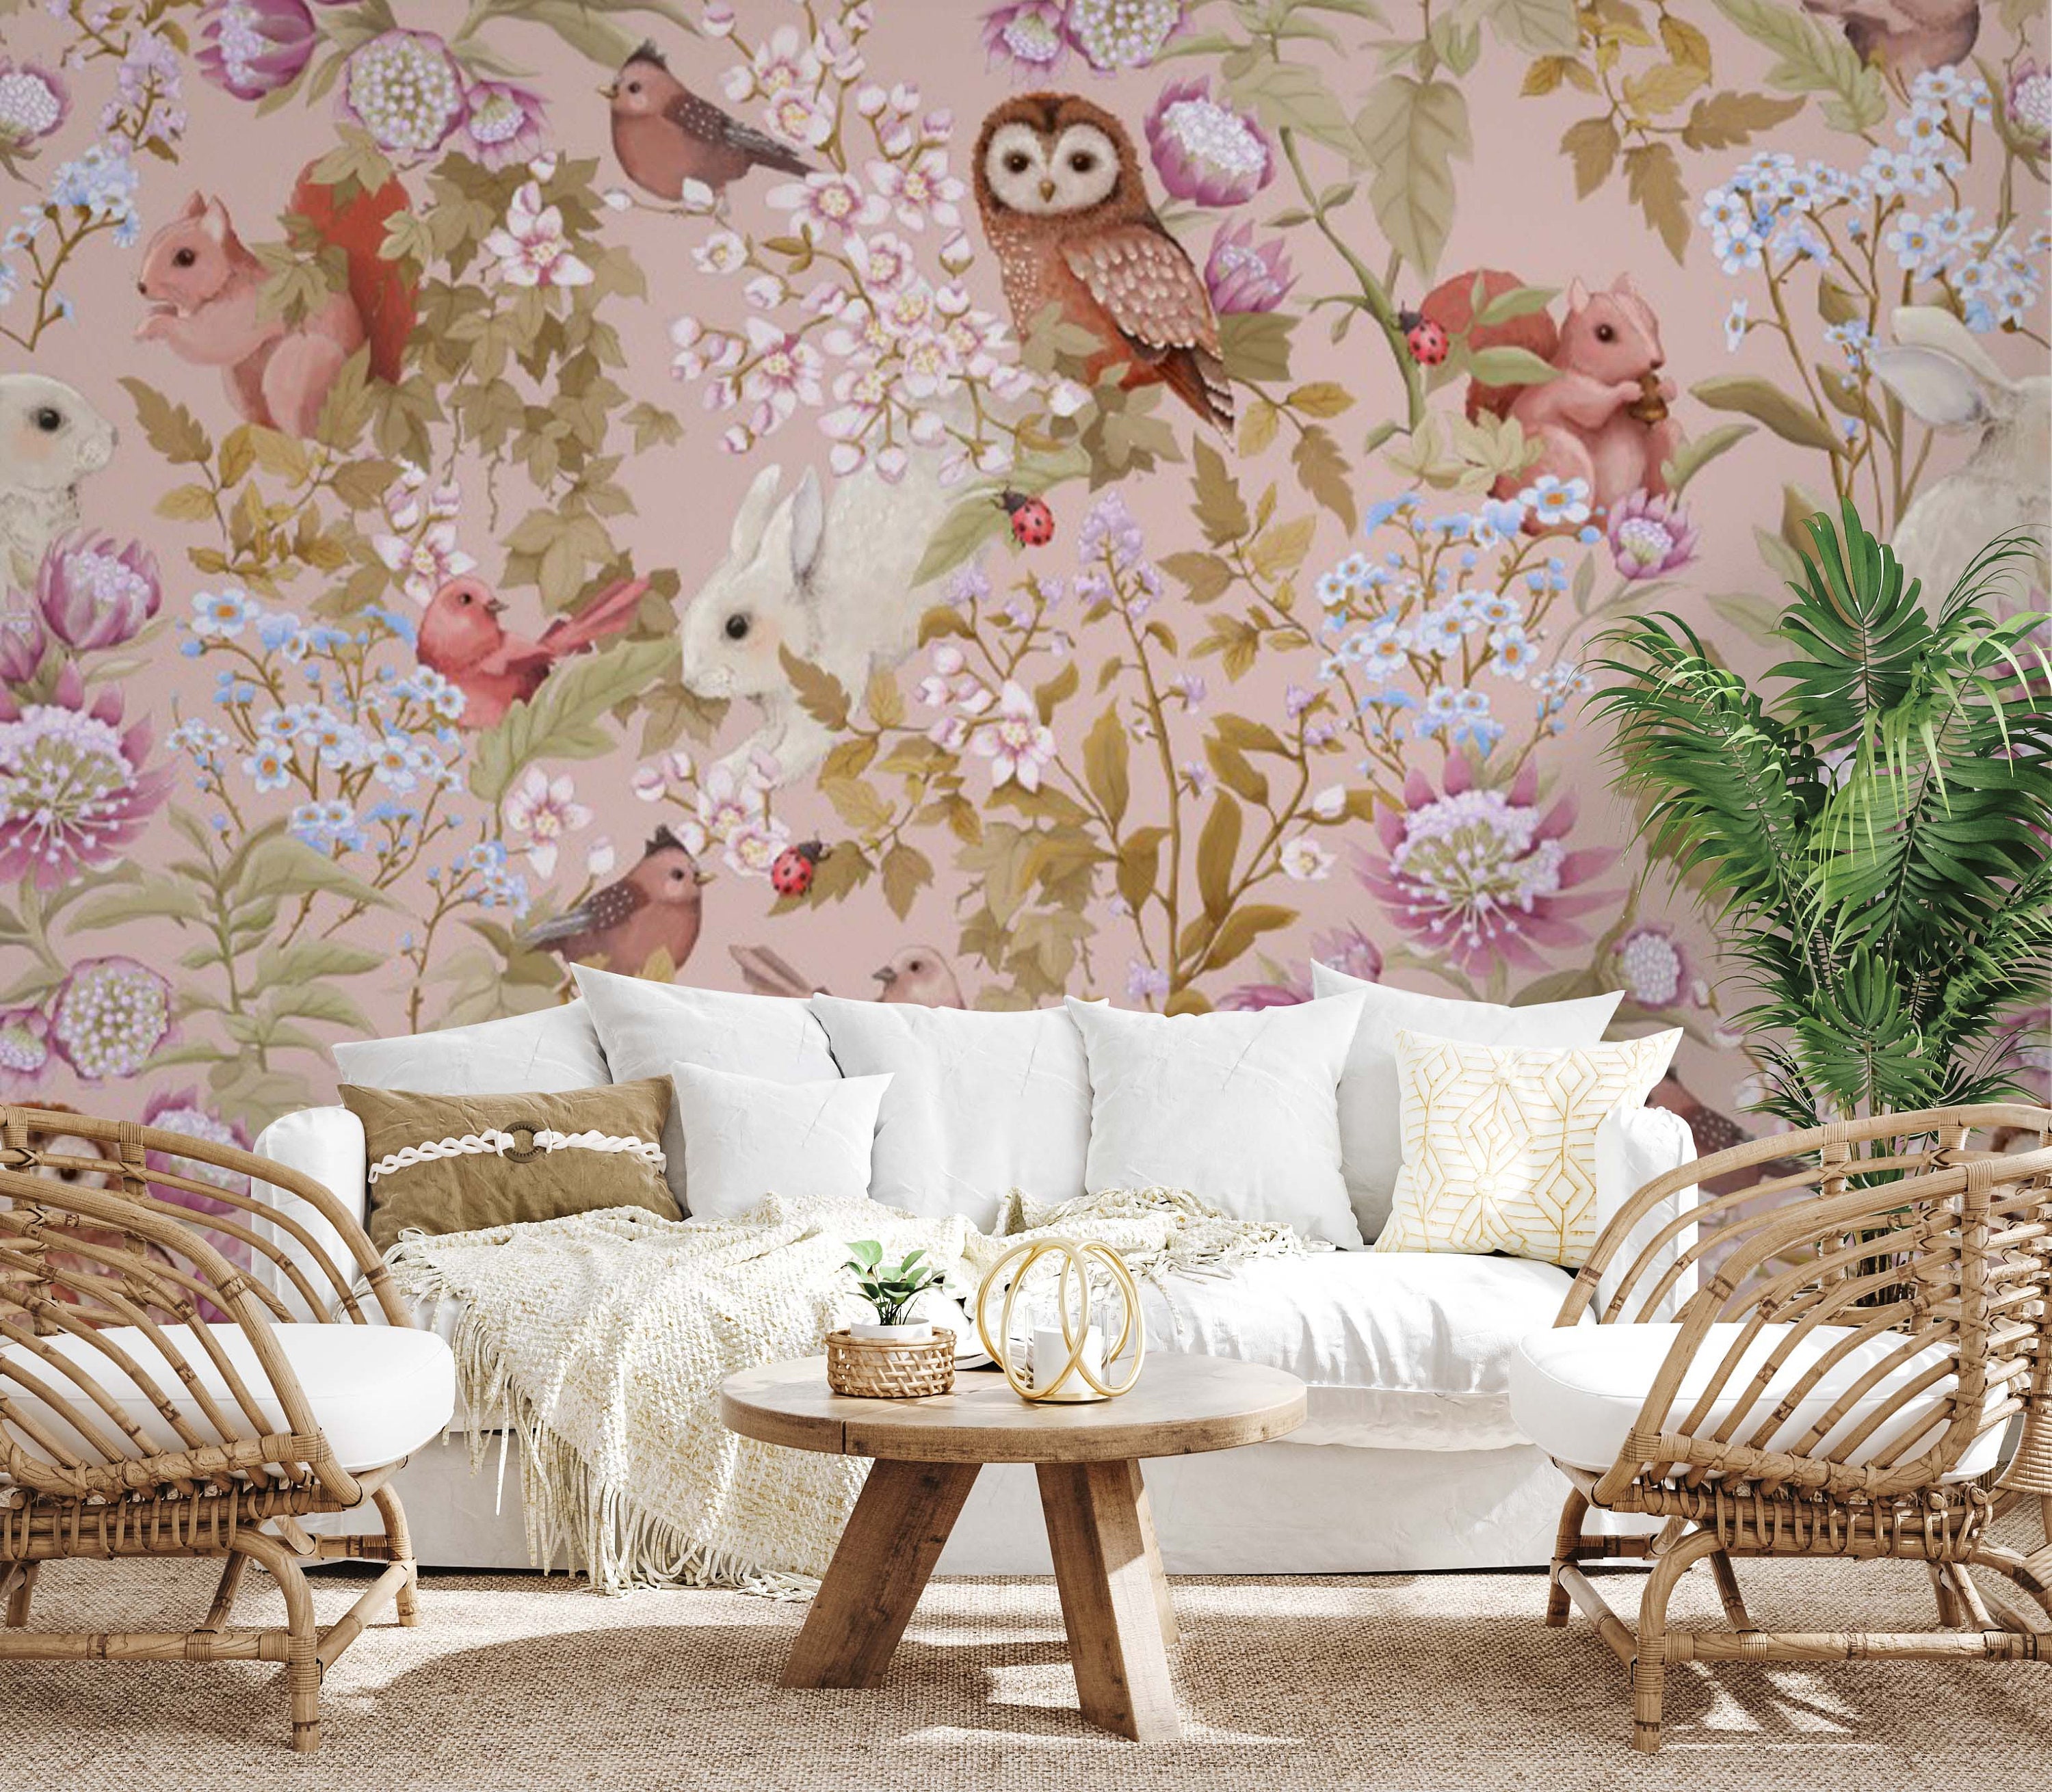 Amazoncom Murwall Chinoiserie Wallpaper Peel and Stick Soft Asian Trees  Wall Mural OU000084STYLE 1  Handmade Products